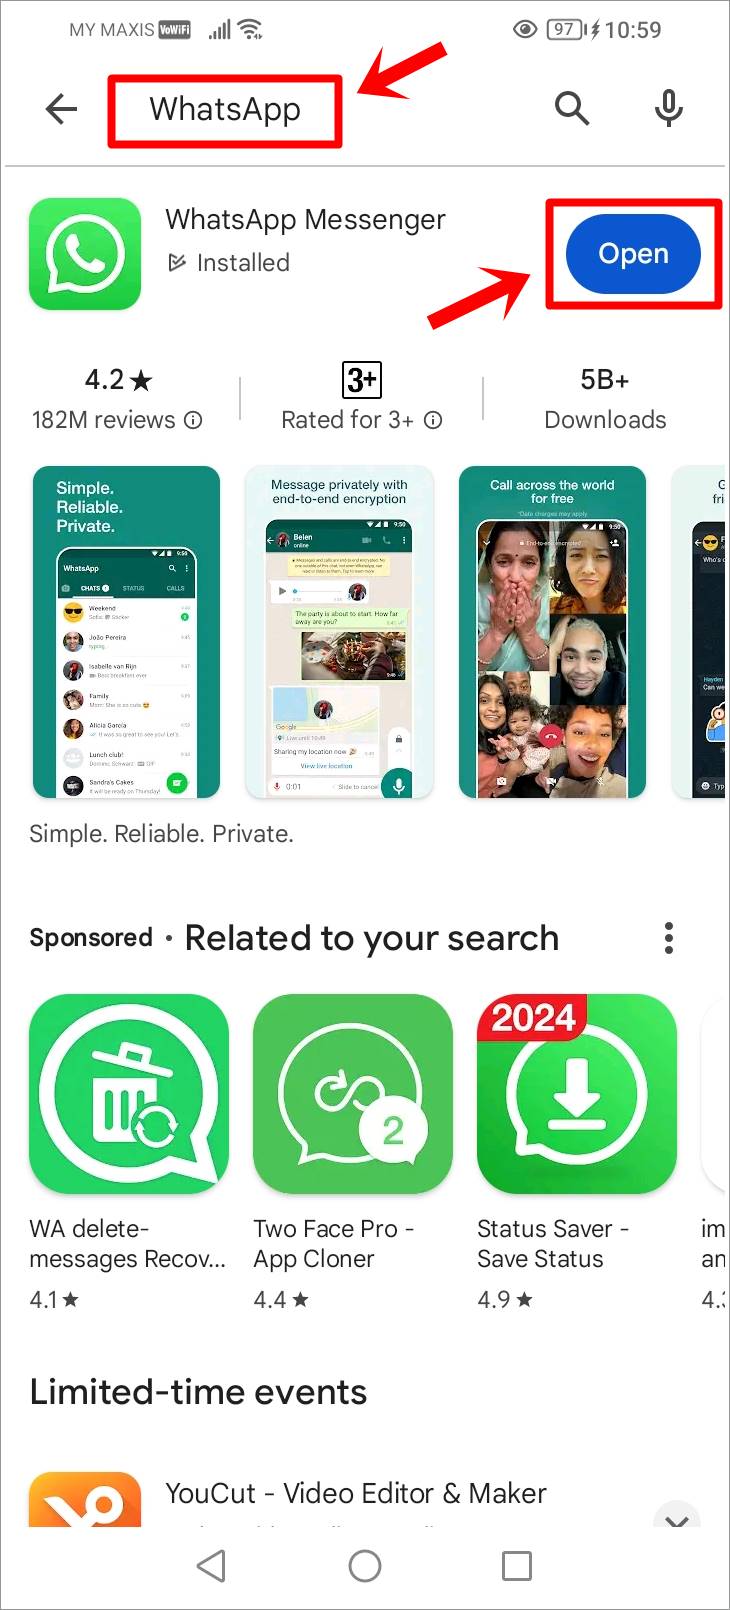 Fix WhatsApp Not Receiving Messages: This screenshot shows the 'Play Store' search result for 'WhatsApp' on an Android phone. The keyword 'WhatsApp' is highlighted in the search bar, and the 'Update' button next to the WhatsApp app is also highlighted.